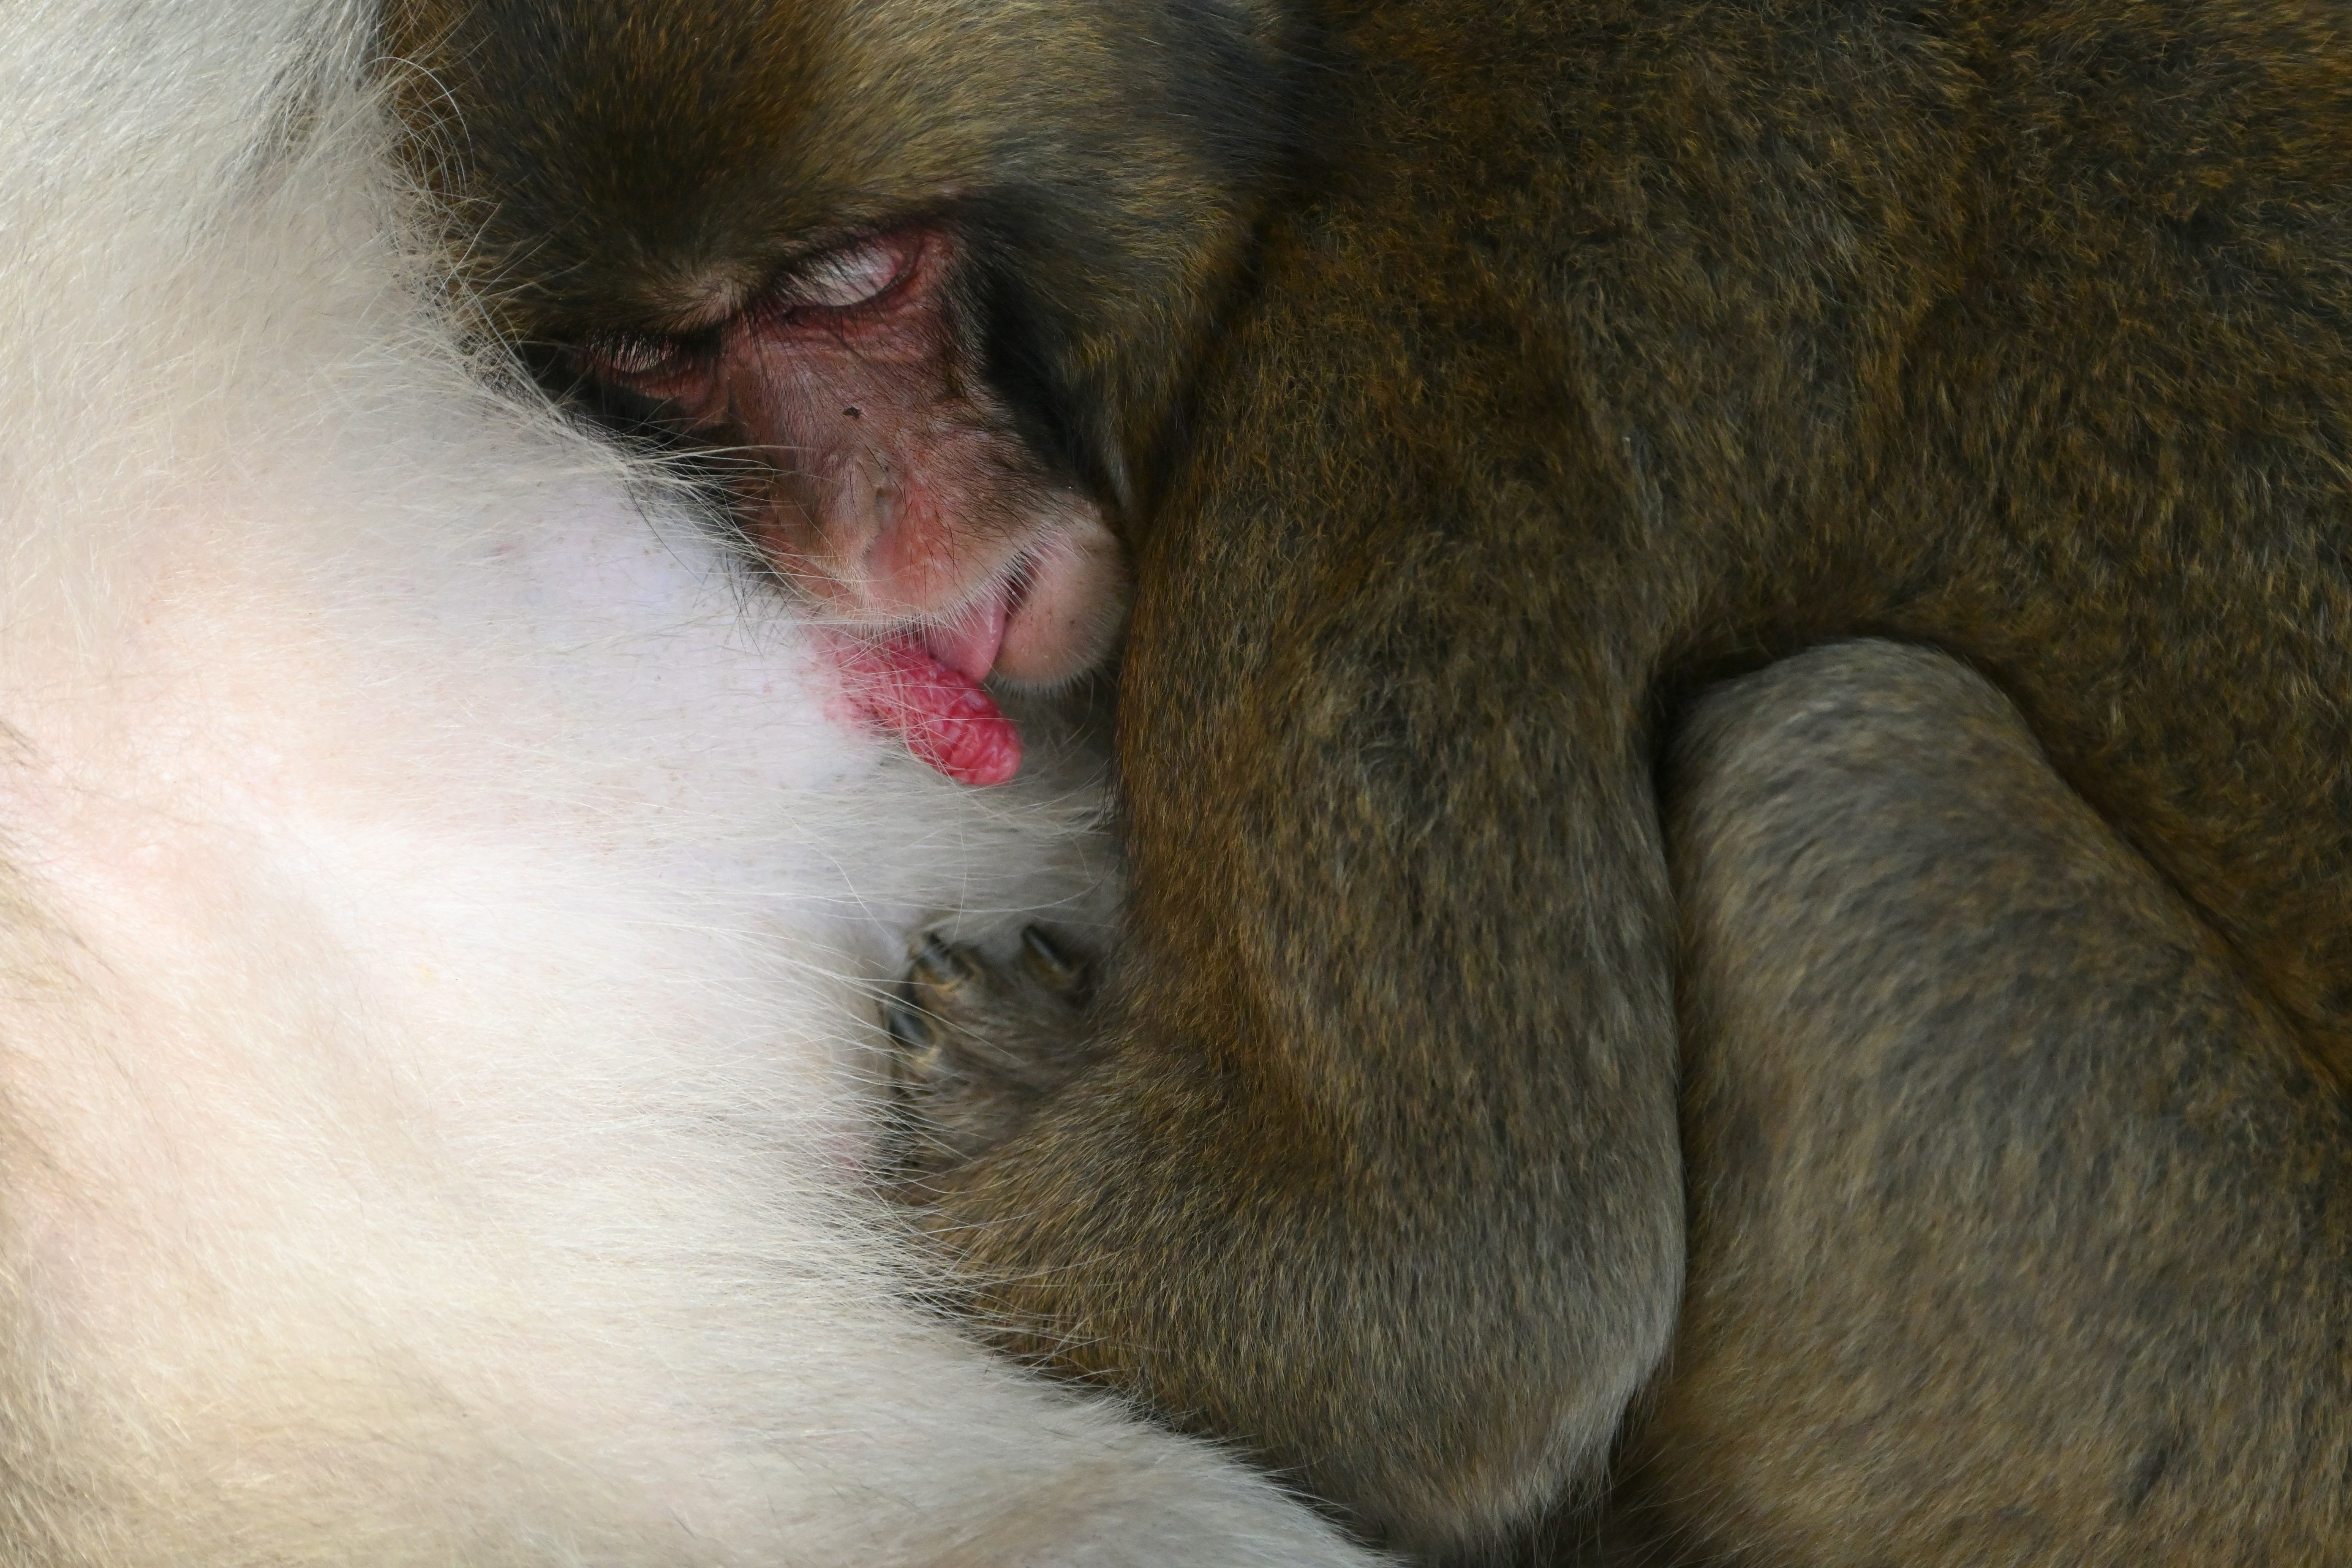 Young monkey is licking his mother's nipple in the memory of baby.